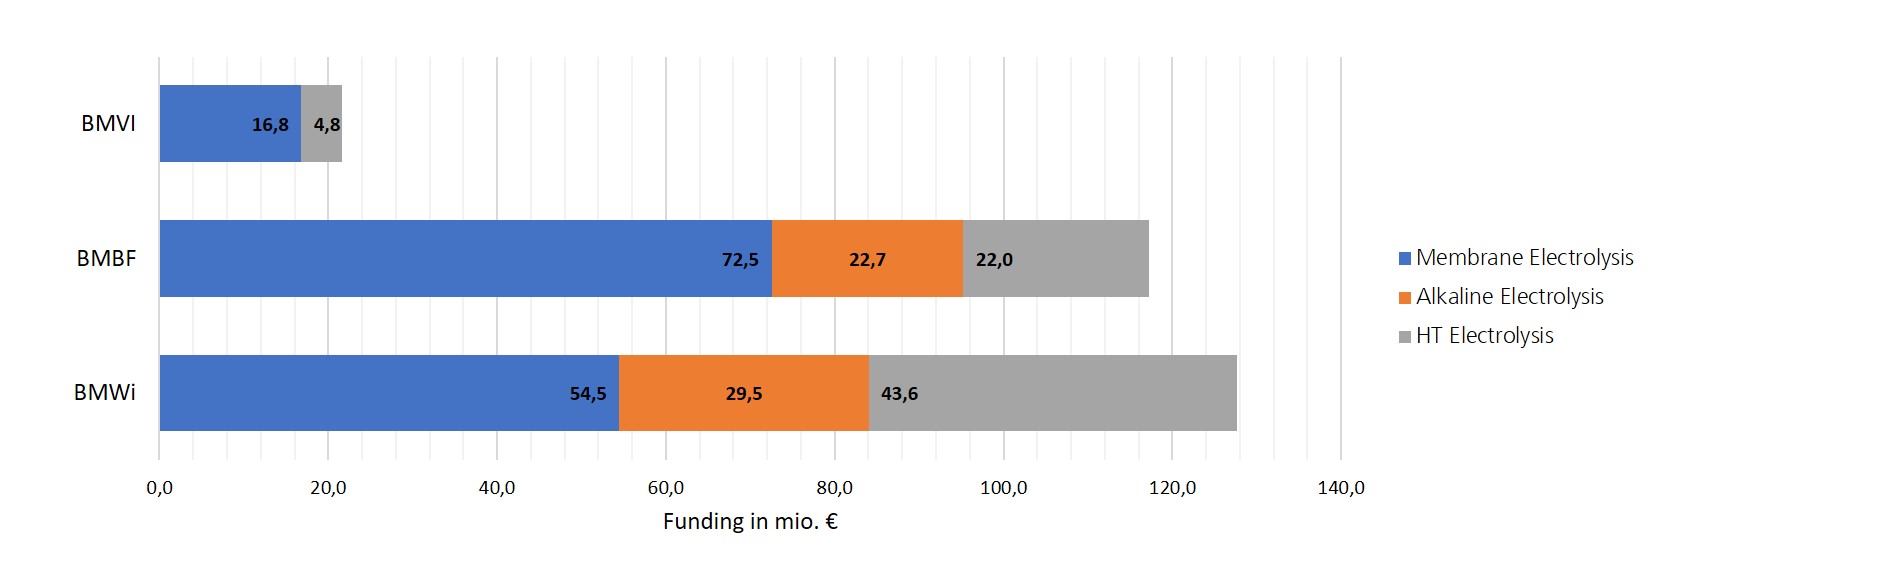 Figure 6: A bar graph depicting the amount of funding (in mio. €) that each ministry contributes to the various types of electrolysis.